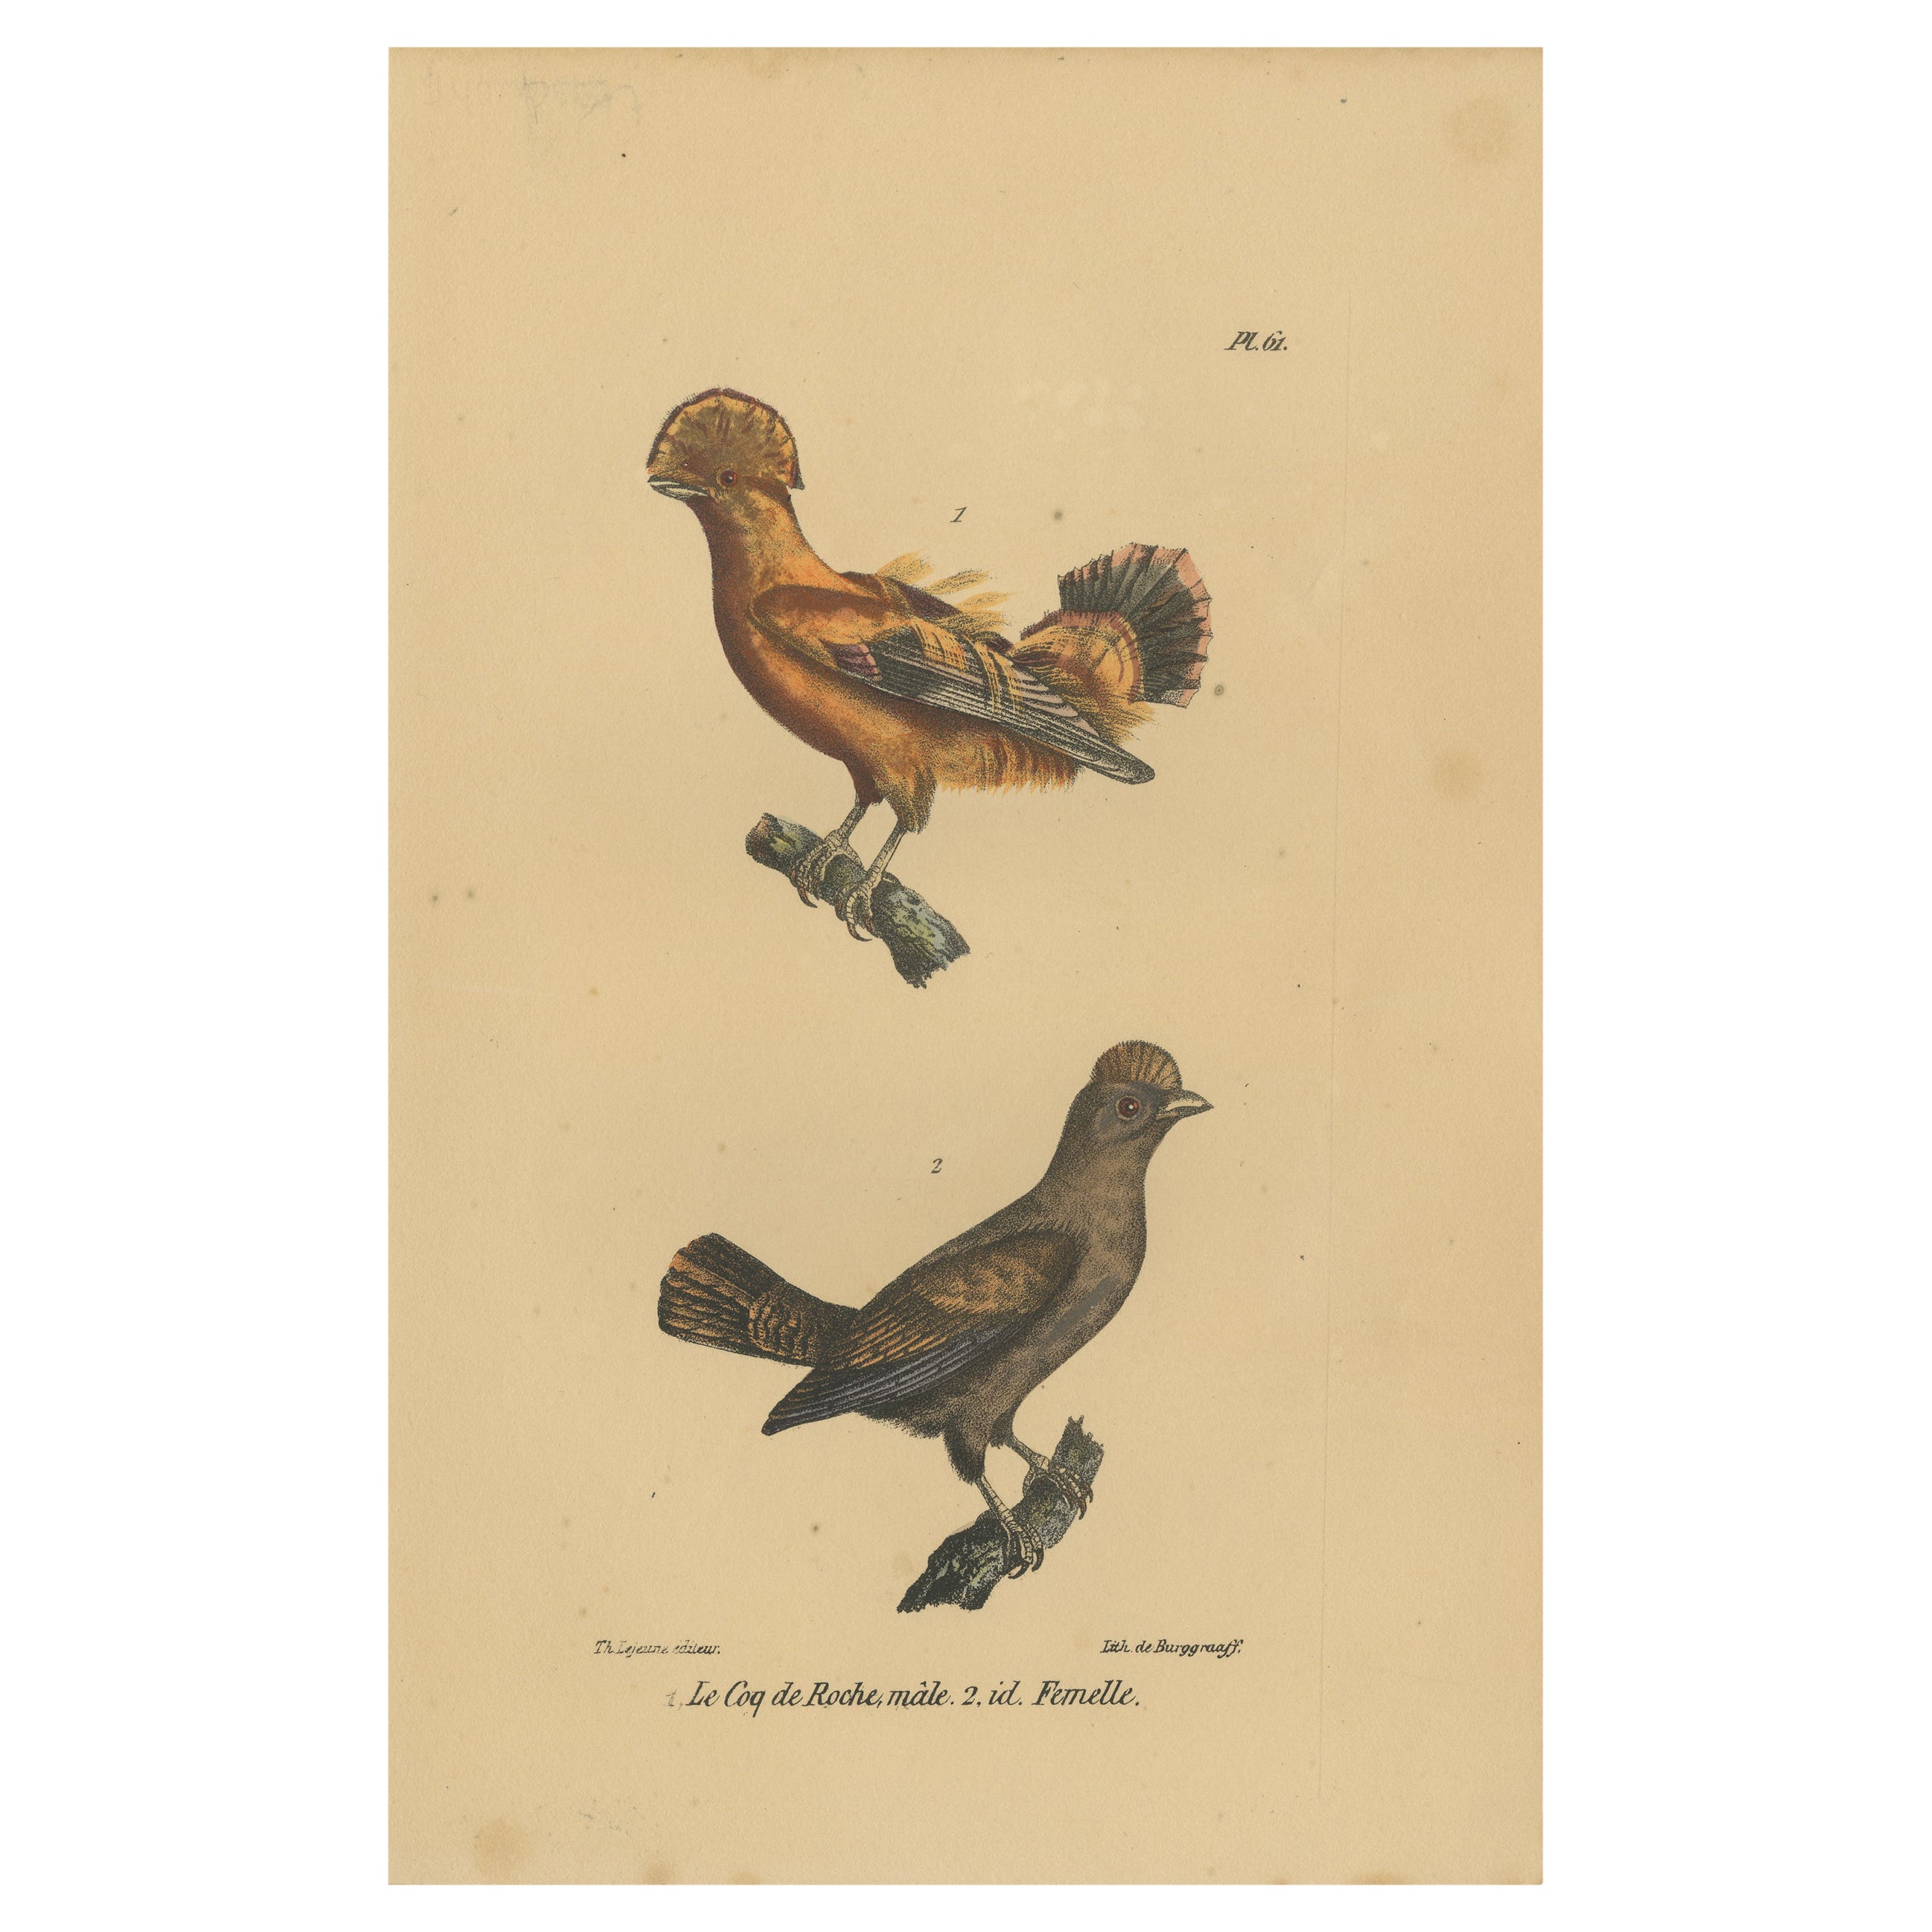 Pl. 61 Antique Bird Print of Cocks-of-the-Rock by Lejeune 'c.1830' For Sale